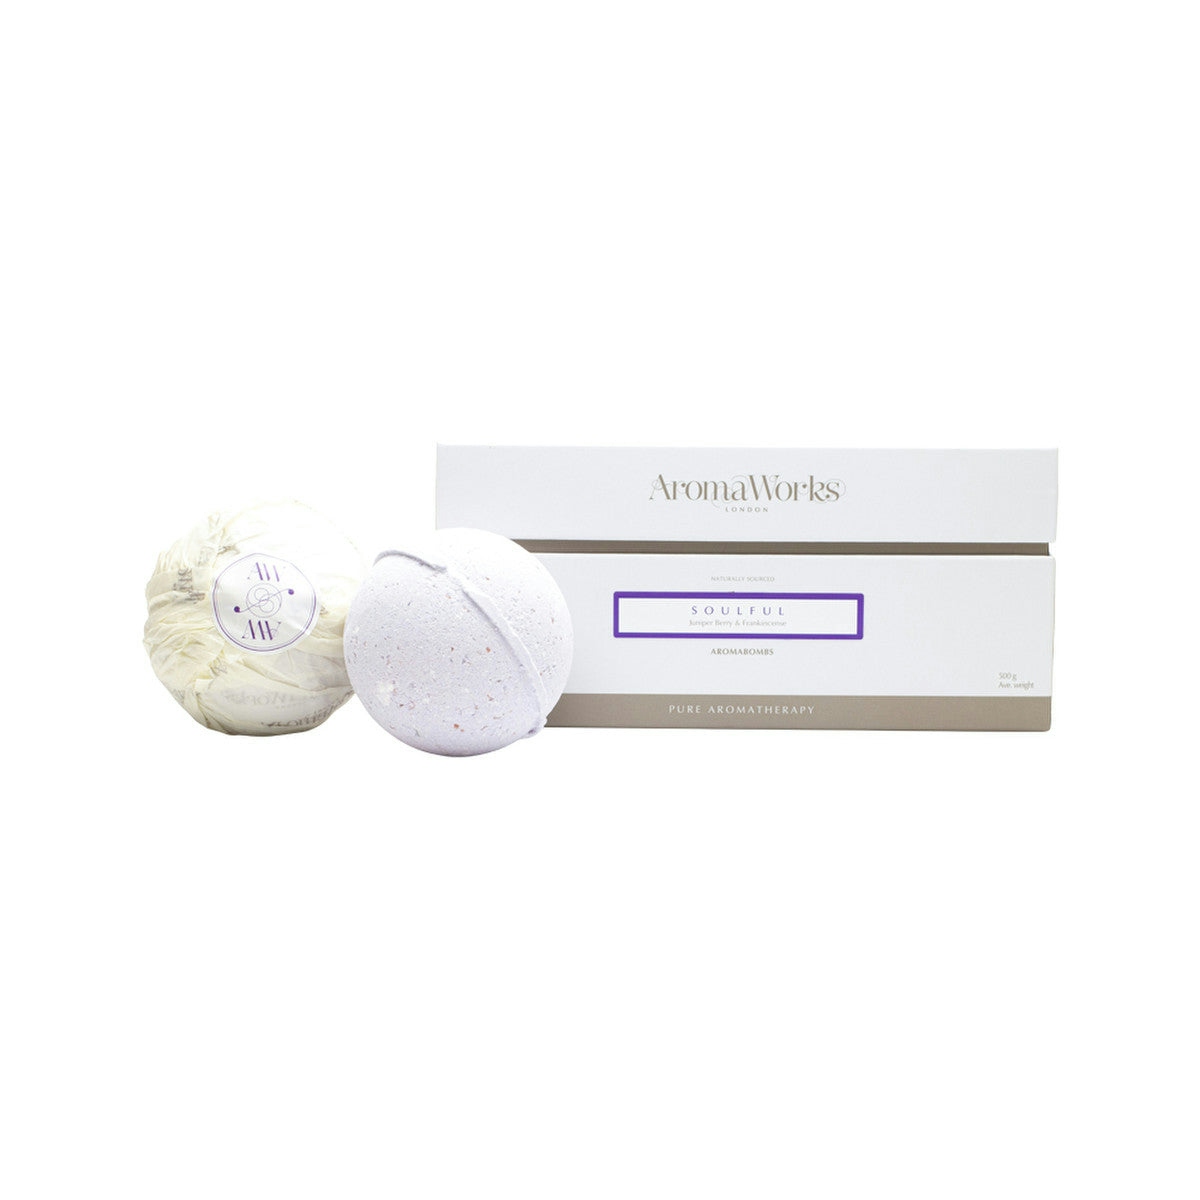 image of AromaWorks AromaBomb Duo Soulful 250g x 2 Pack on white background